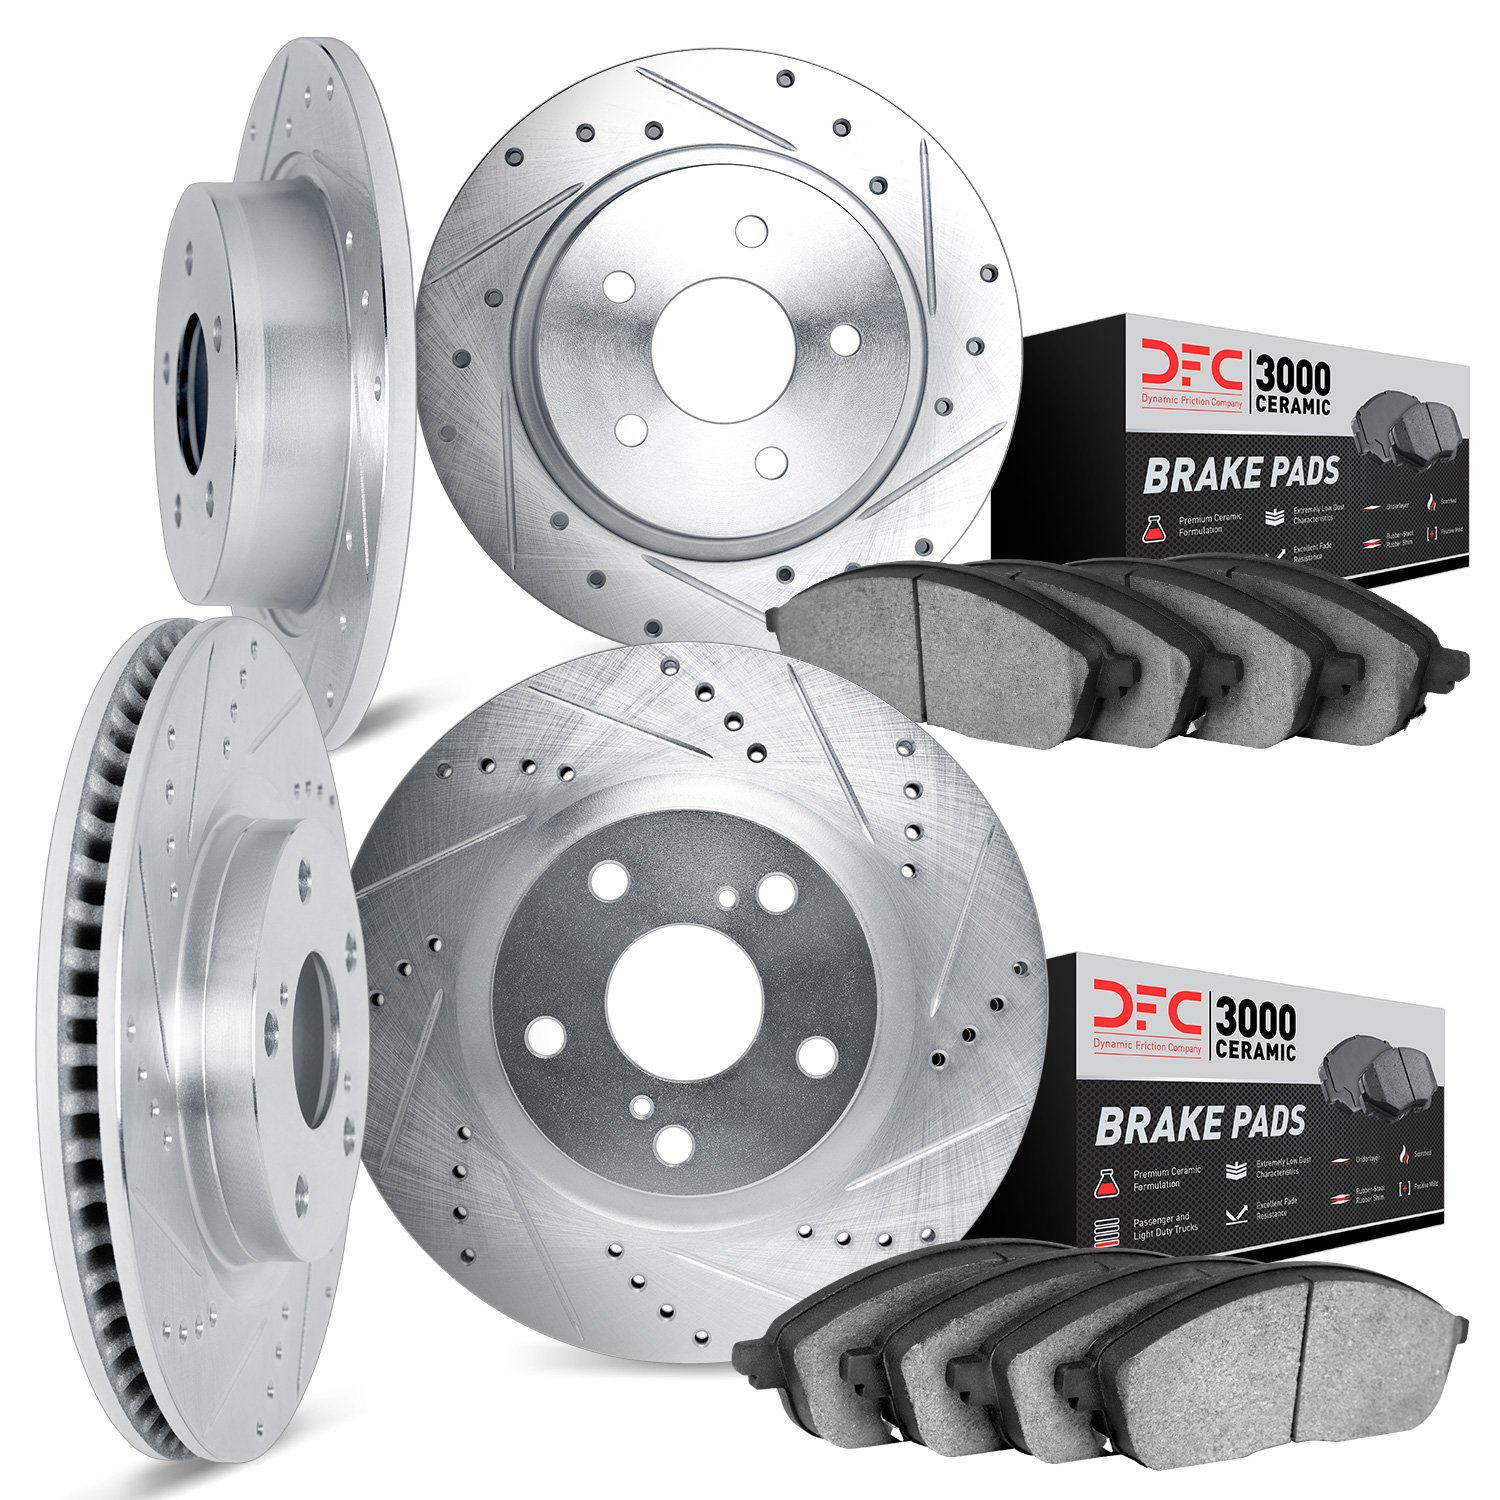 7304-56003 Drilled/Slotted Brake Rotor with 3000-Series Ceramic Brake Pads Kit [Silver], 1991-1994 Ford/Lincoln/Mercury/Mazda, P